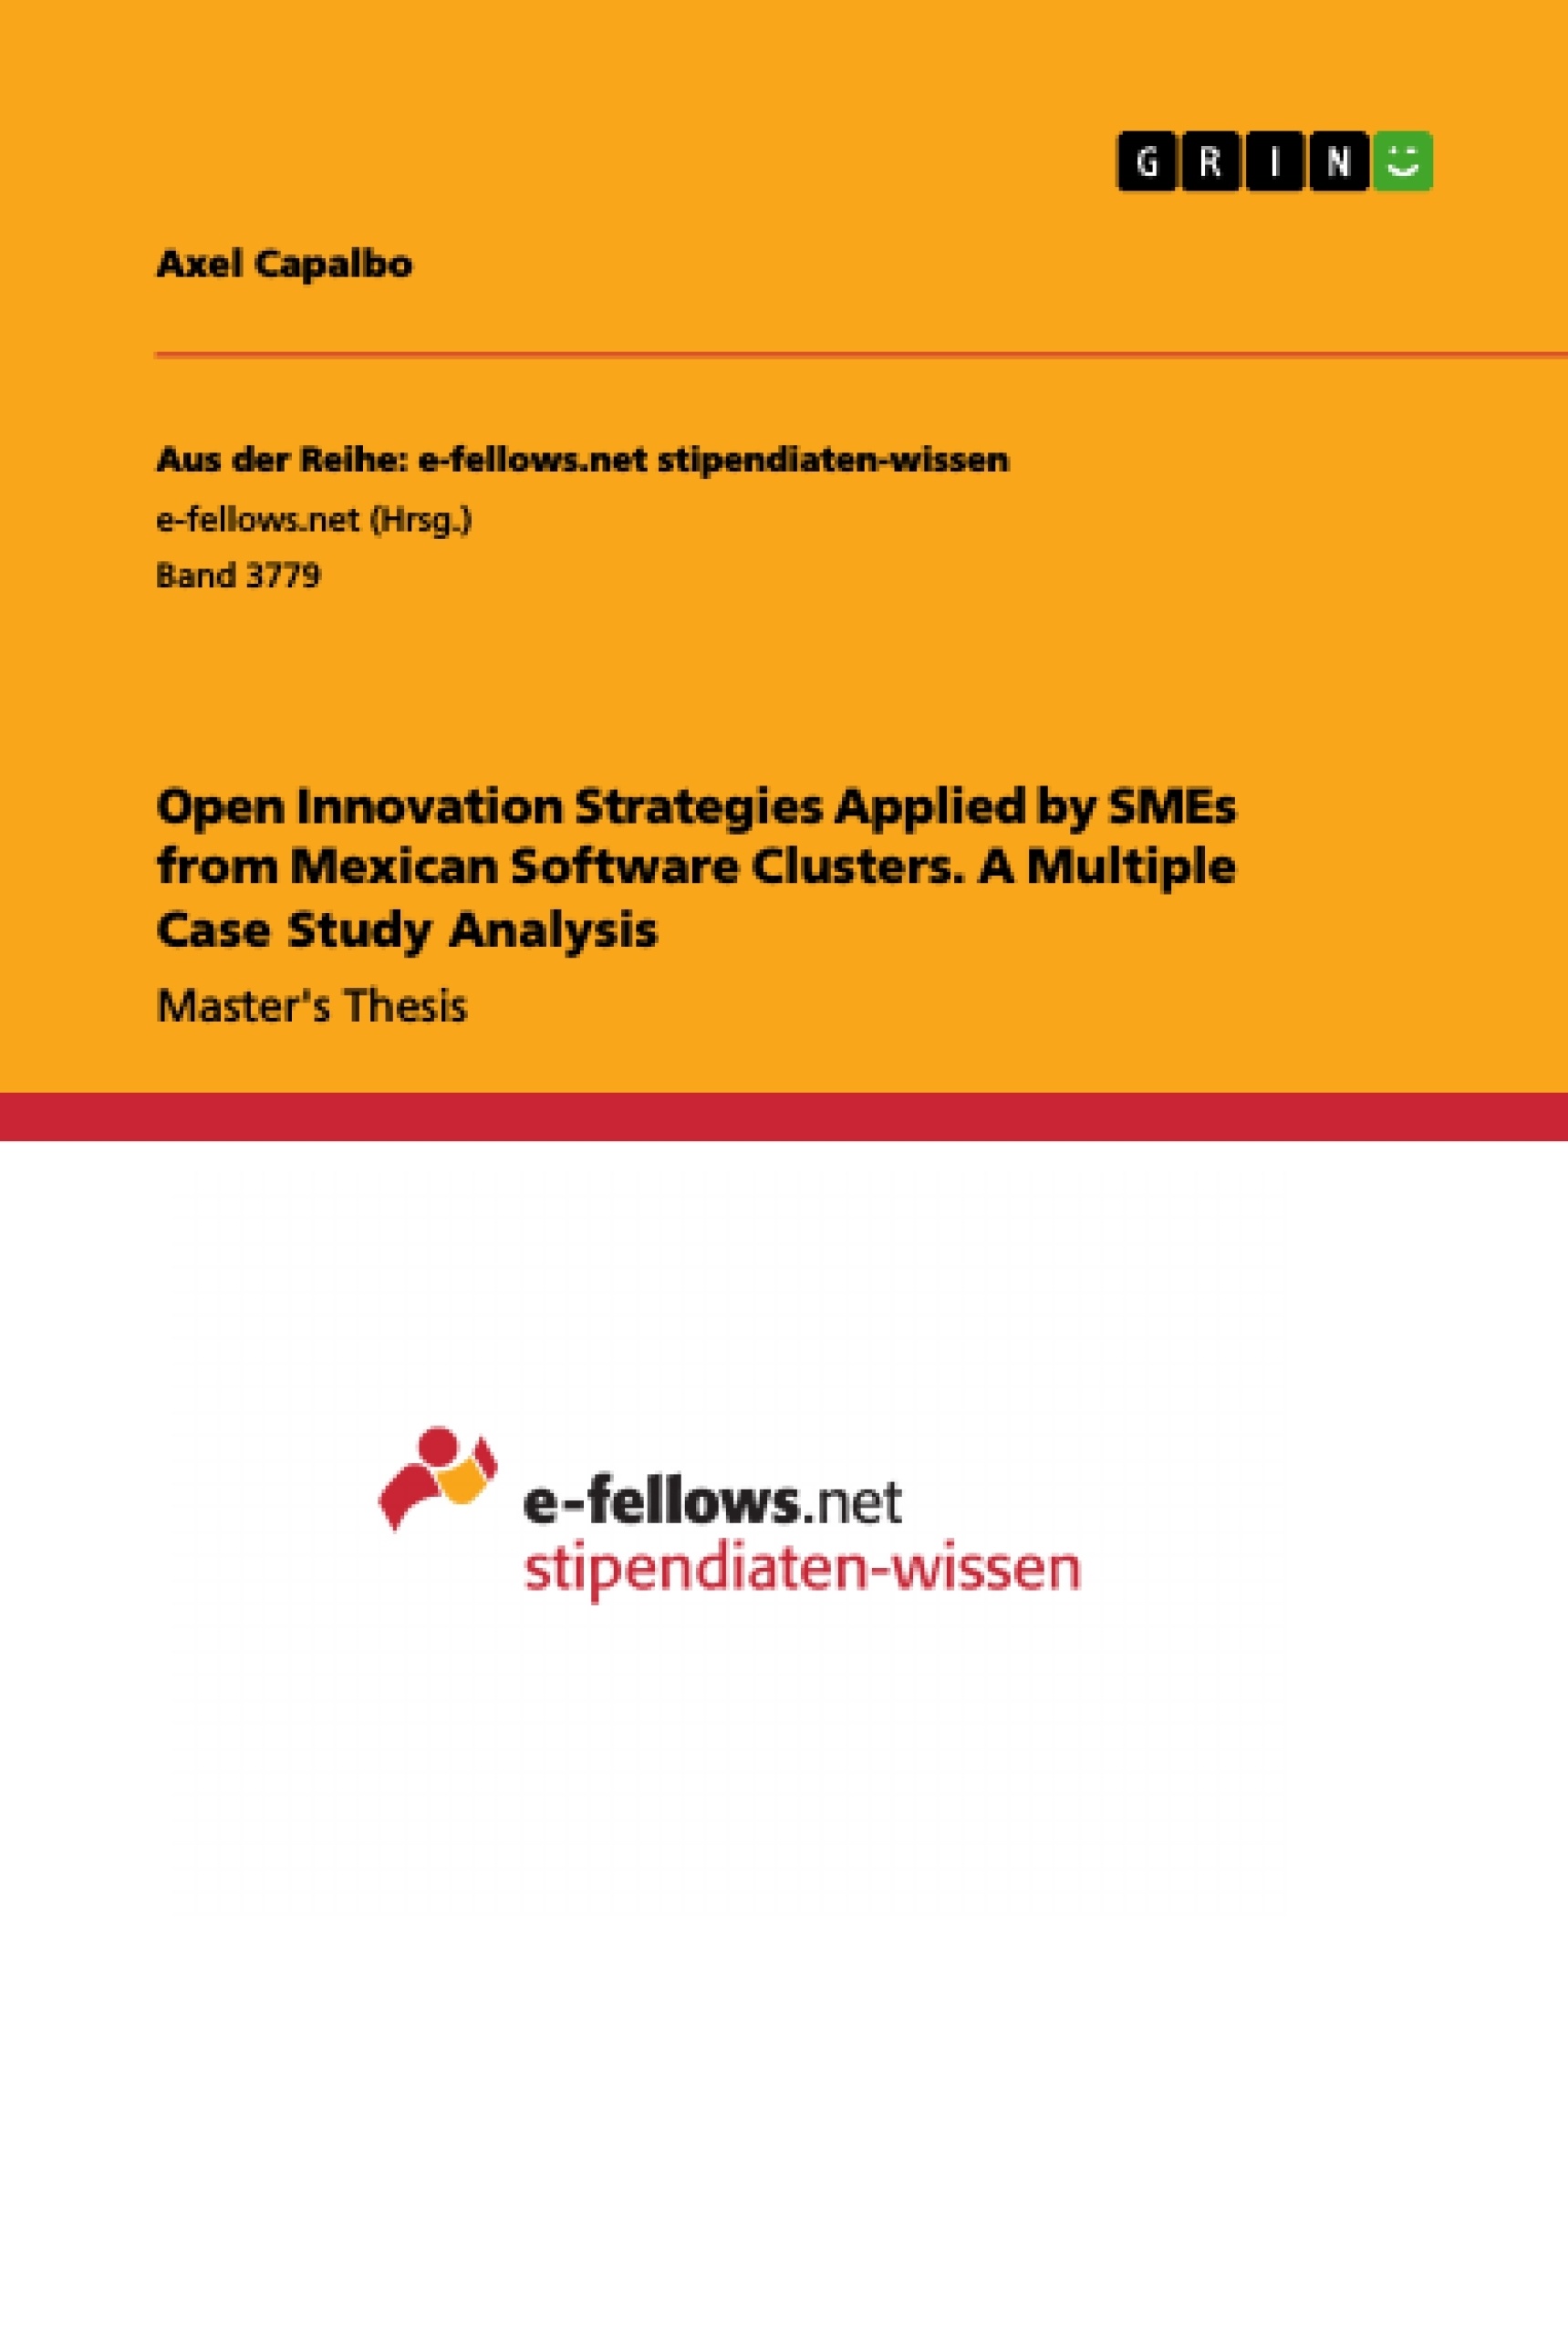 Title: Open Innovation Strategies Applied by SMEs from Mexican Software Clusters. A Multiple Case Study Analysis